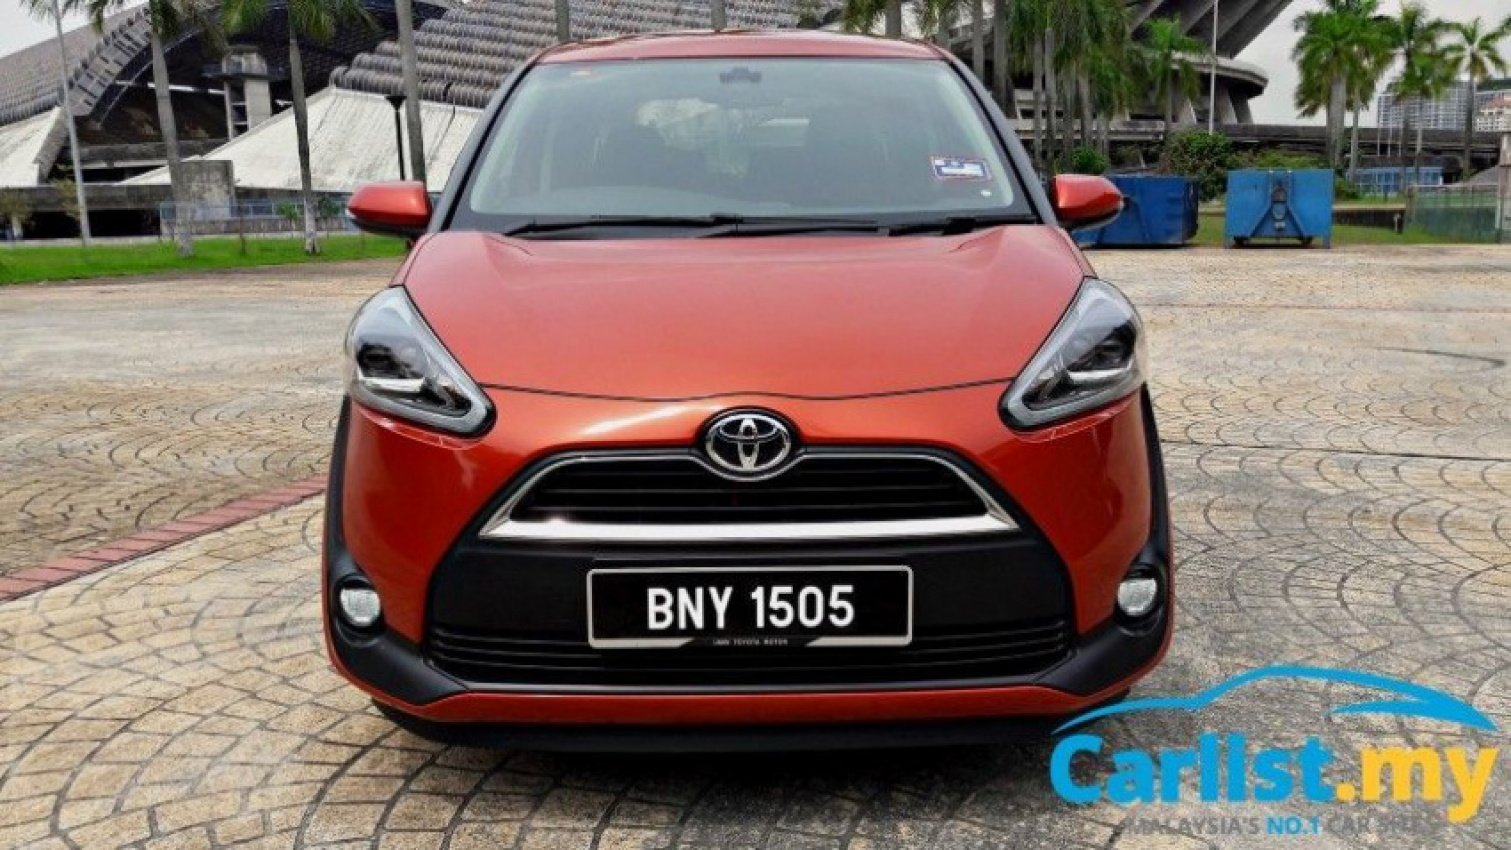 autos, cars, reviews, toyota, 2016 toyota sienta, sienta, toyota sienta, toyota sienta review, toyota sienta review malaysia, review: 2016 toyota sienta 1.5v – let there be excitement for once